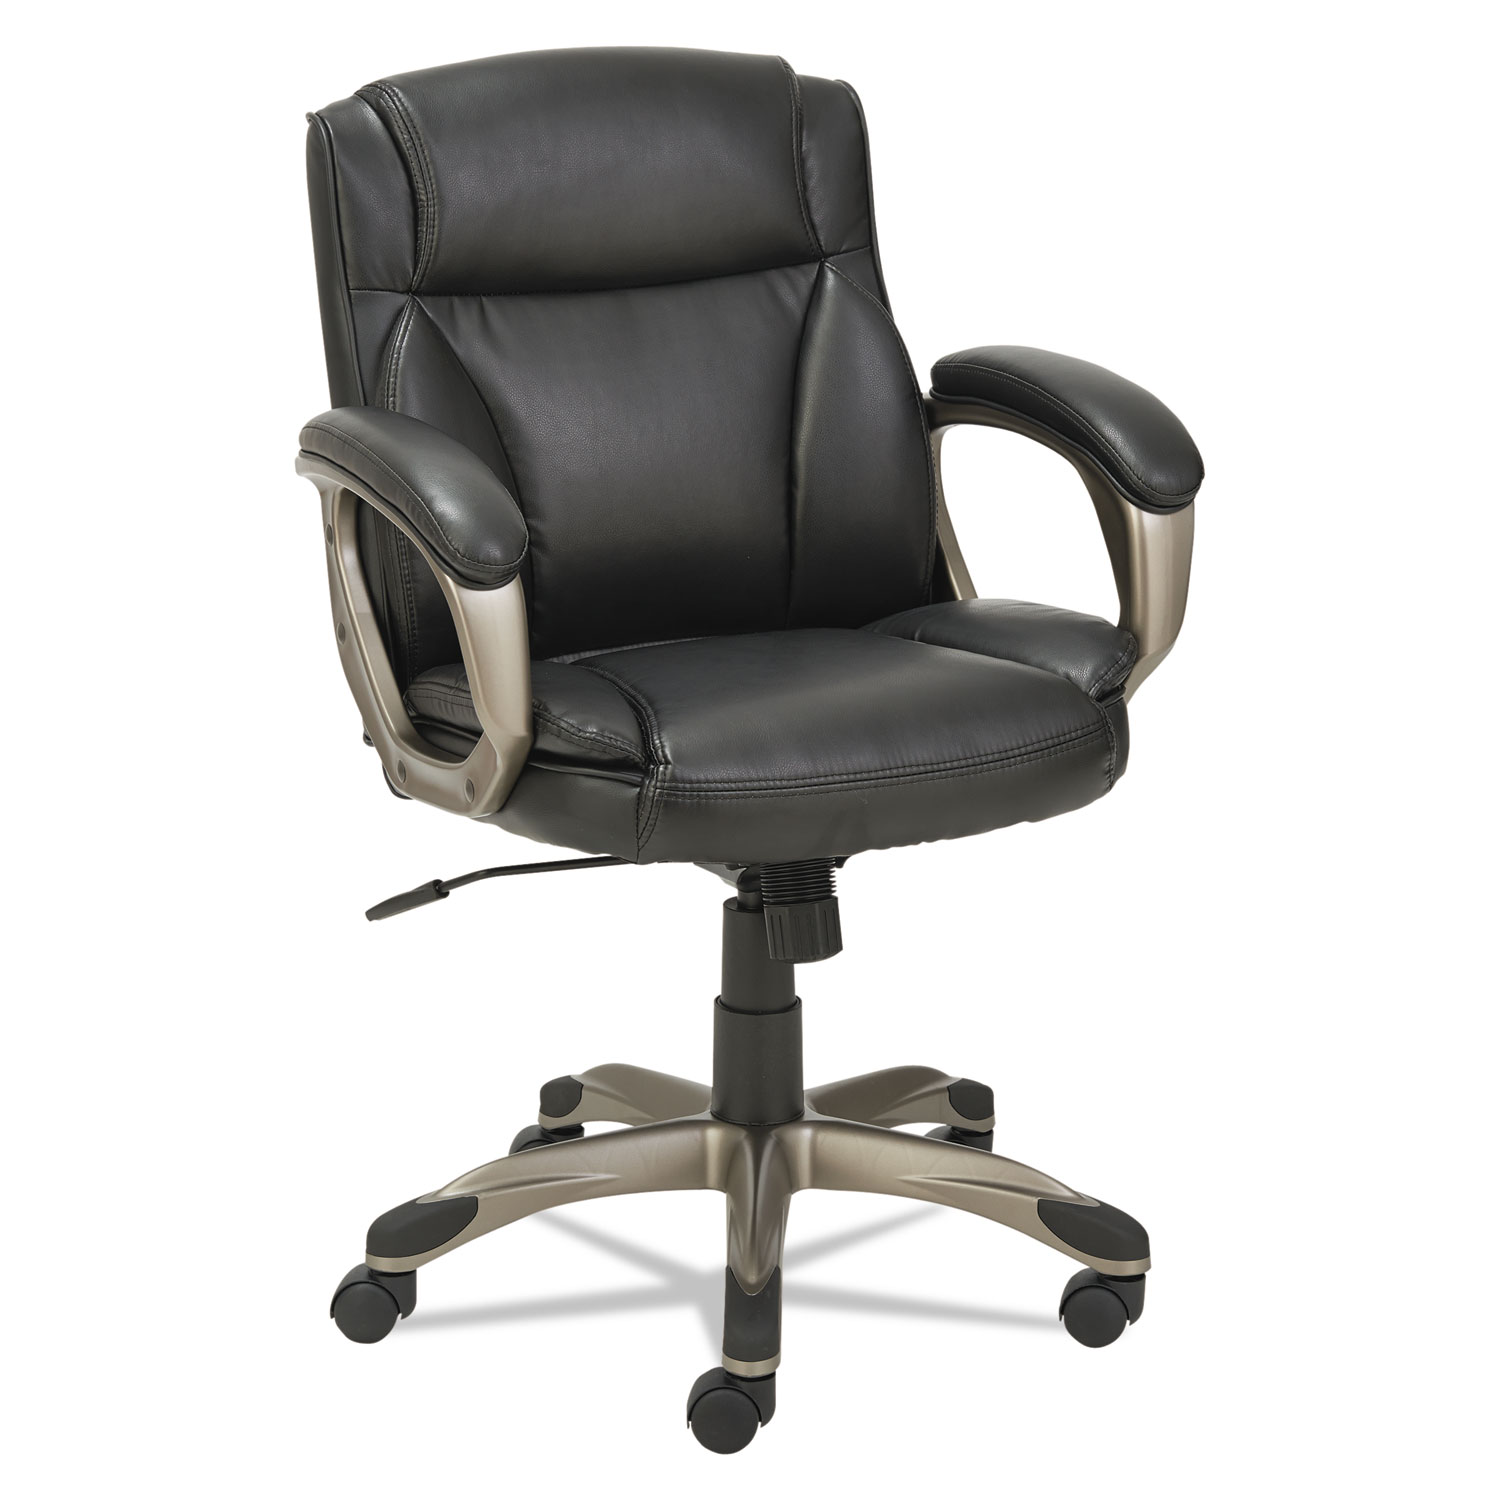  Alera ALEVN6119 Alera Veon Series Low-Back Leather Task Chair, Supports up to 275 lbs., Black Seat/Black Back, Graphite Base (ALEVN6119) 